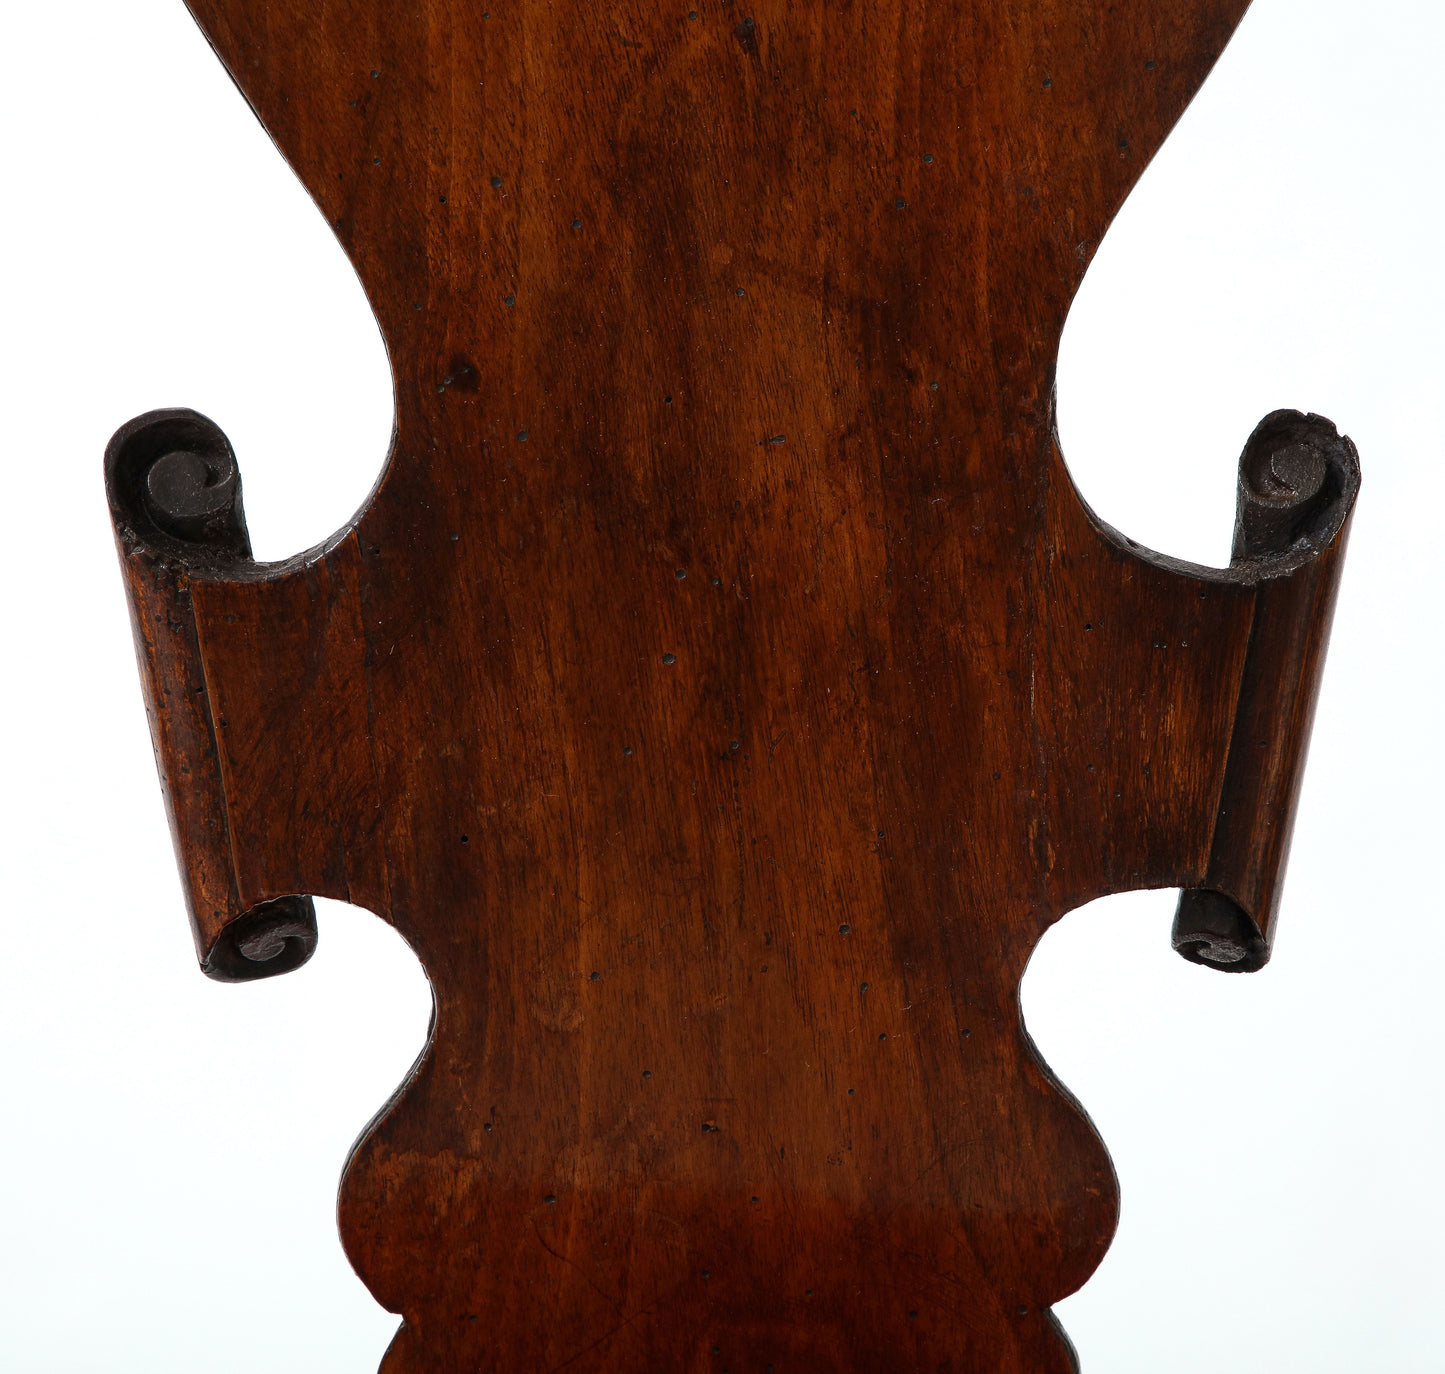 Pair of walnut Anglo-Dutch side chairs circa 1715.